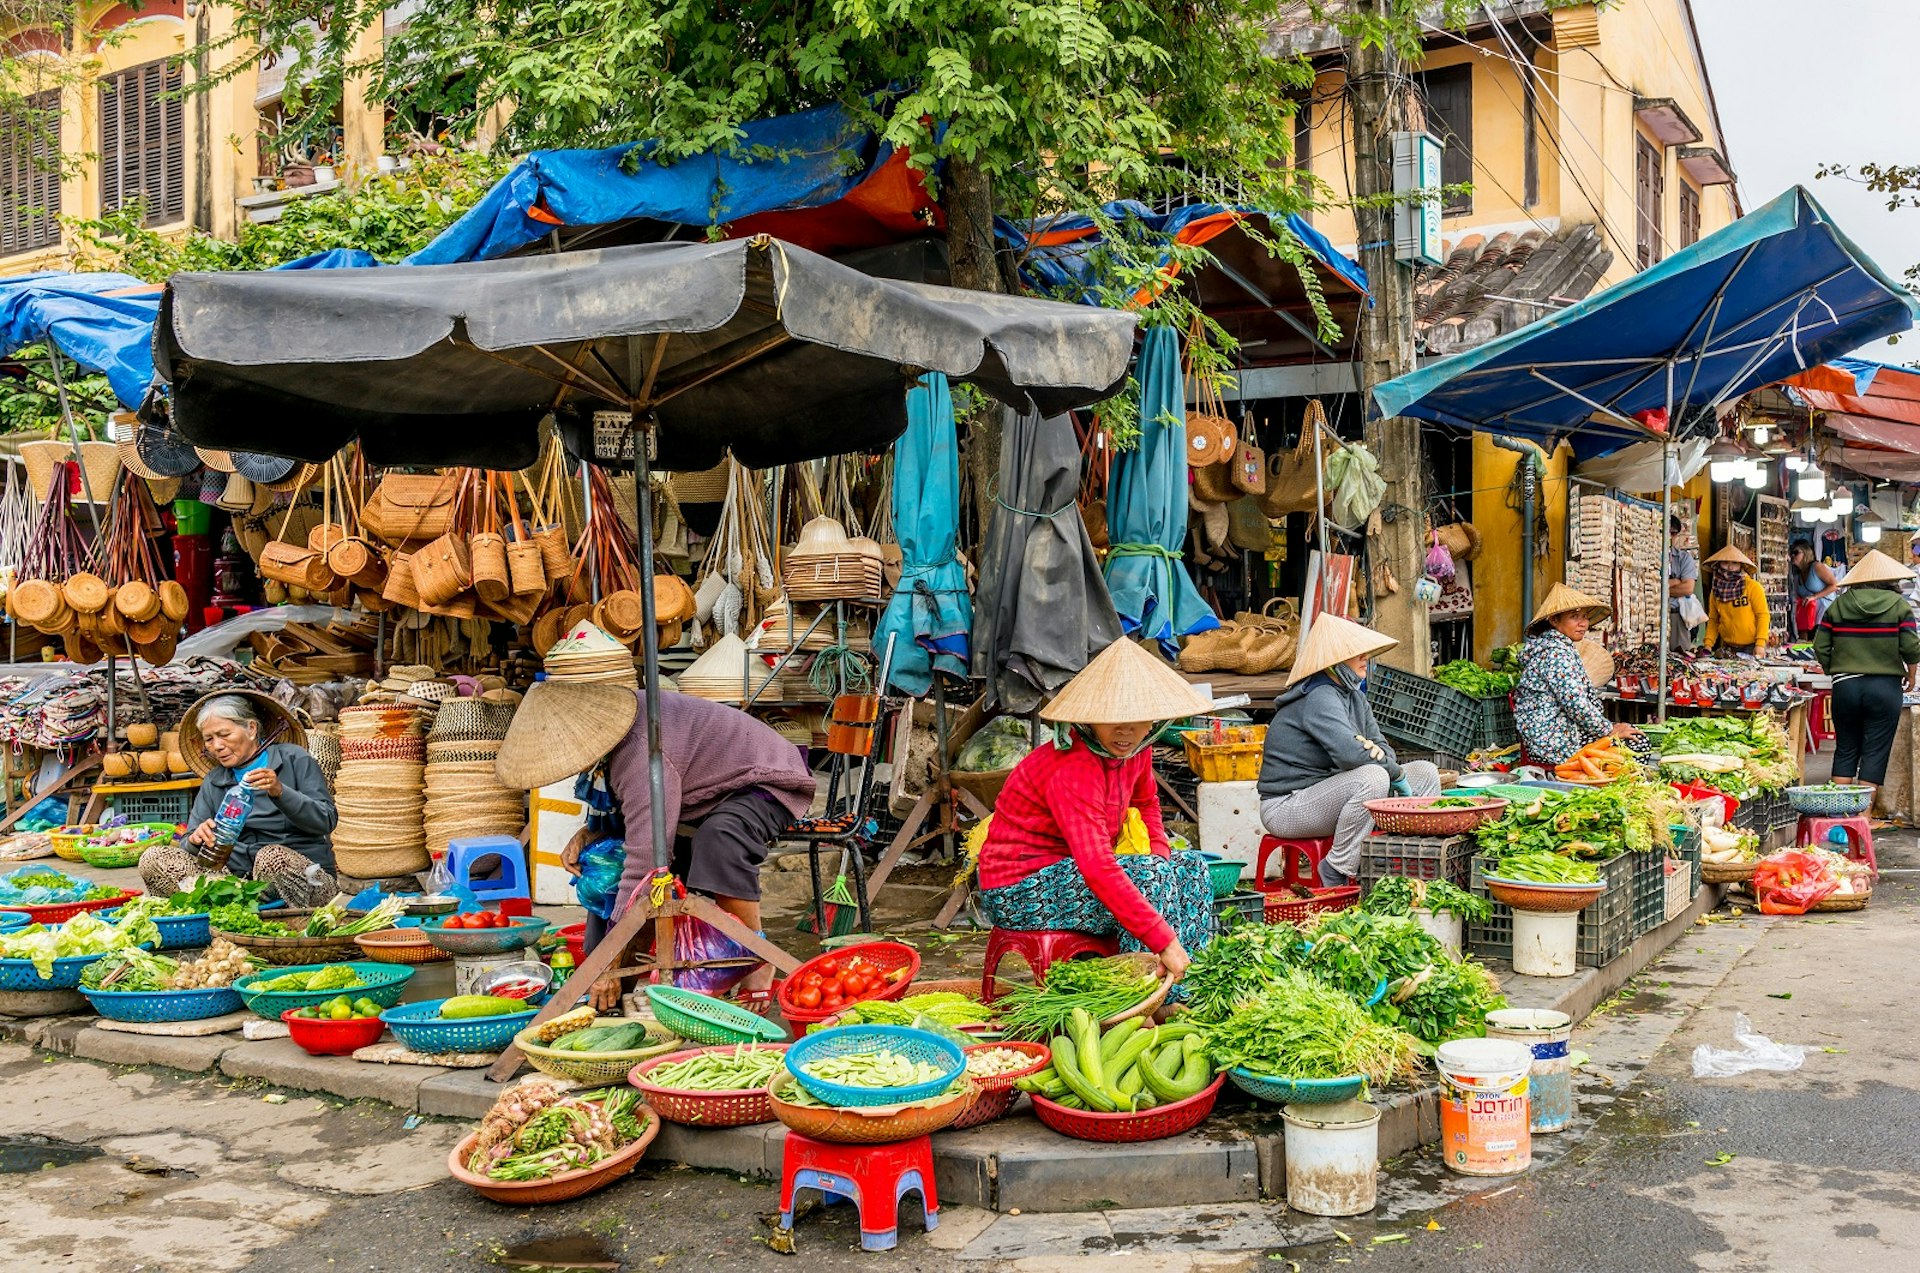 Several traders have set up stalls underneath blue umbrellas, selling fruit, conical hats, baskets and bags. 